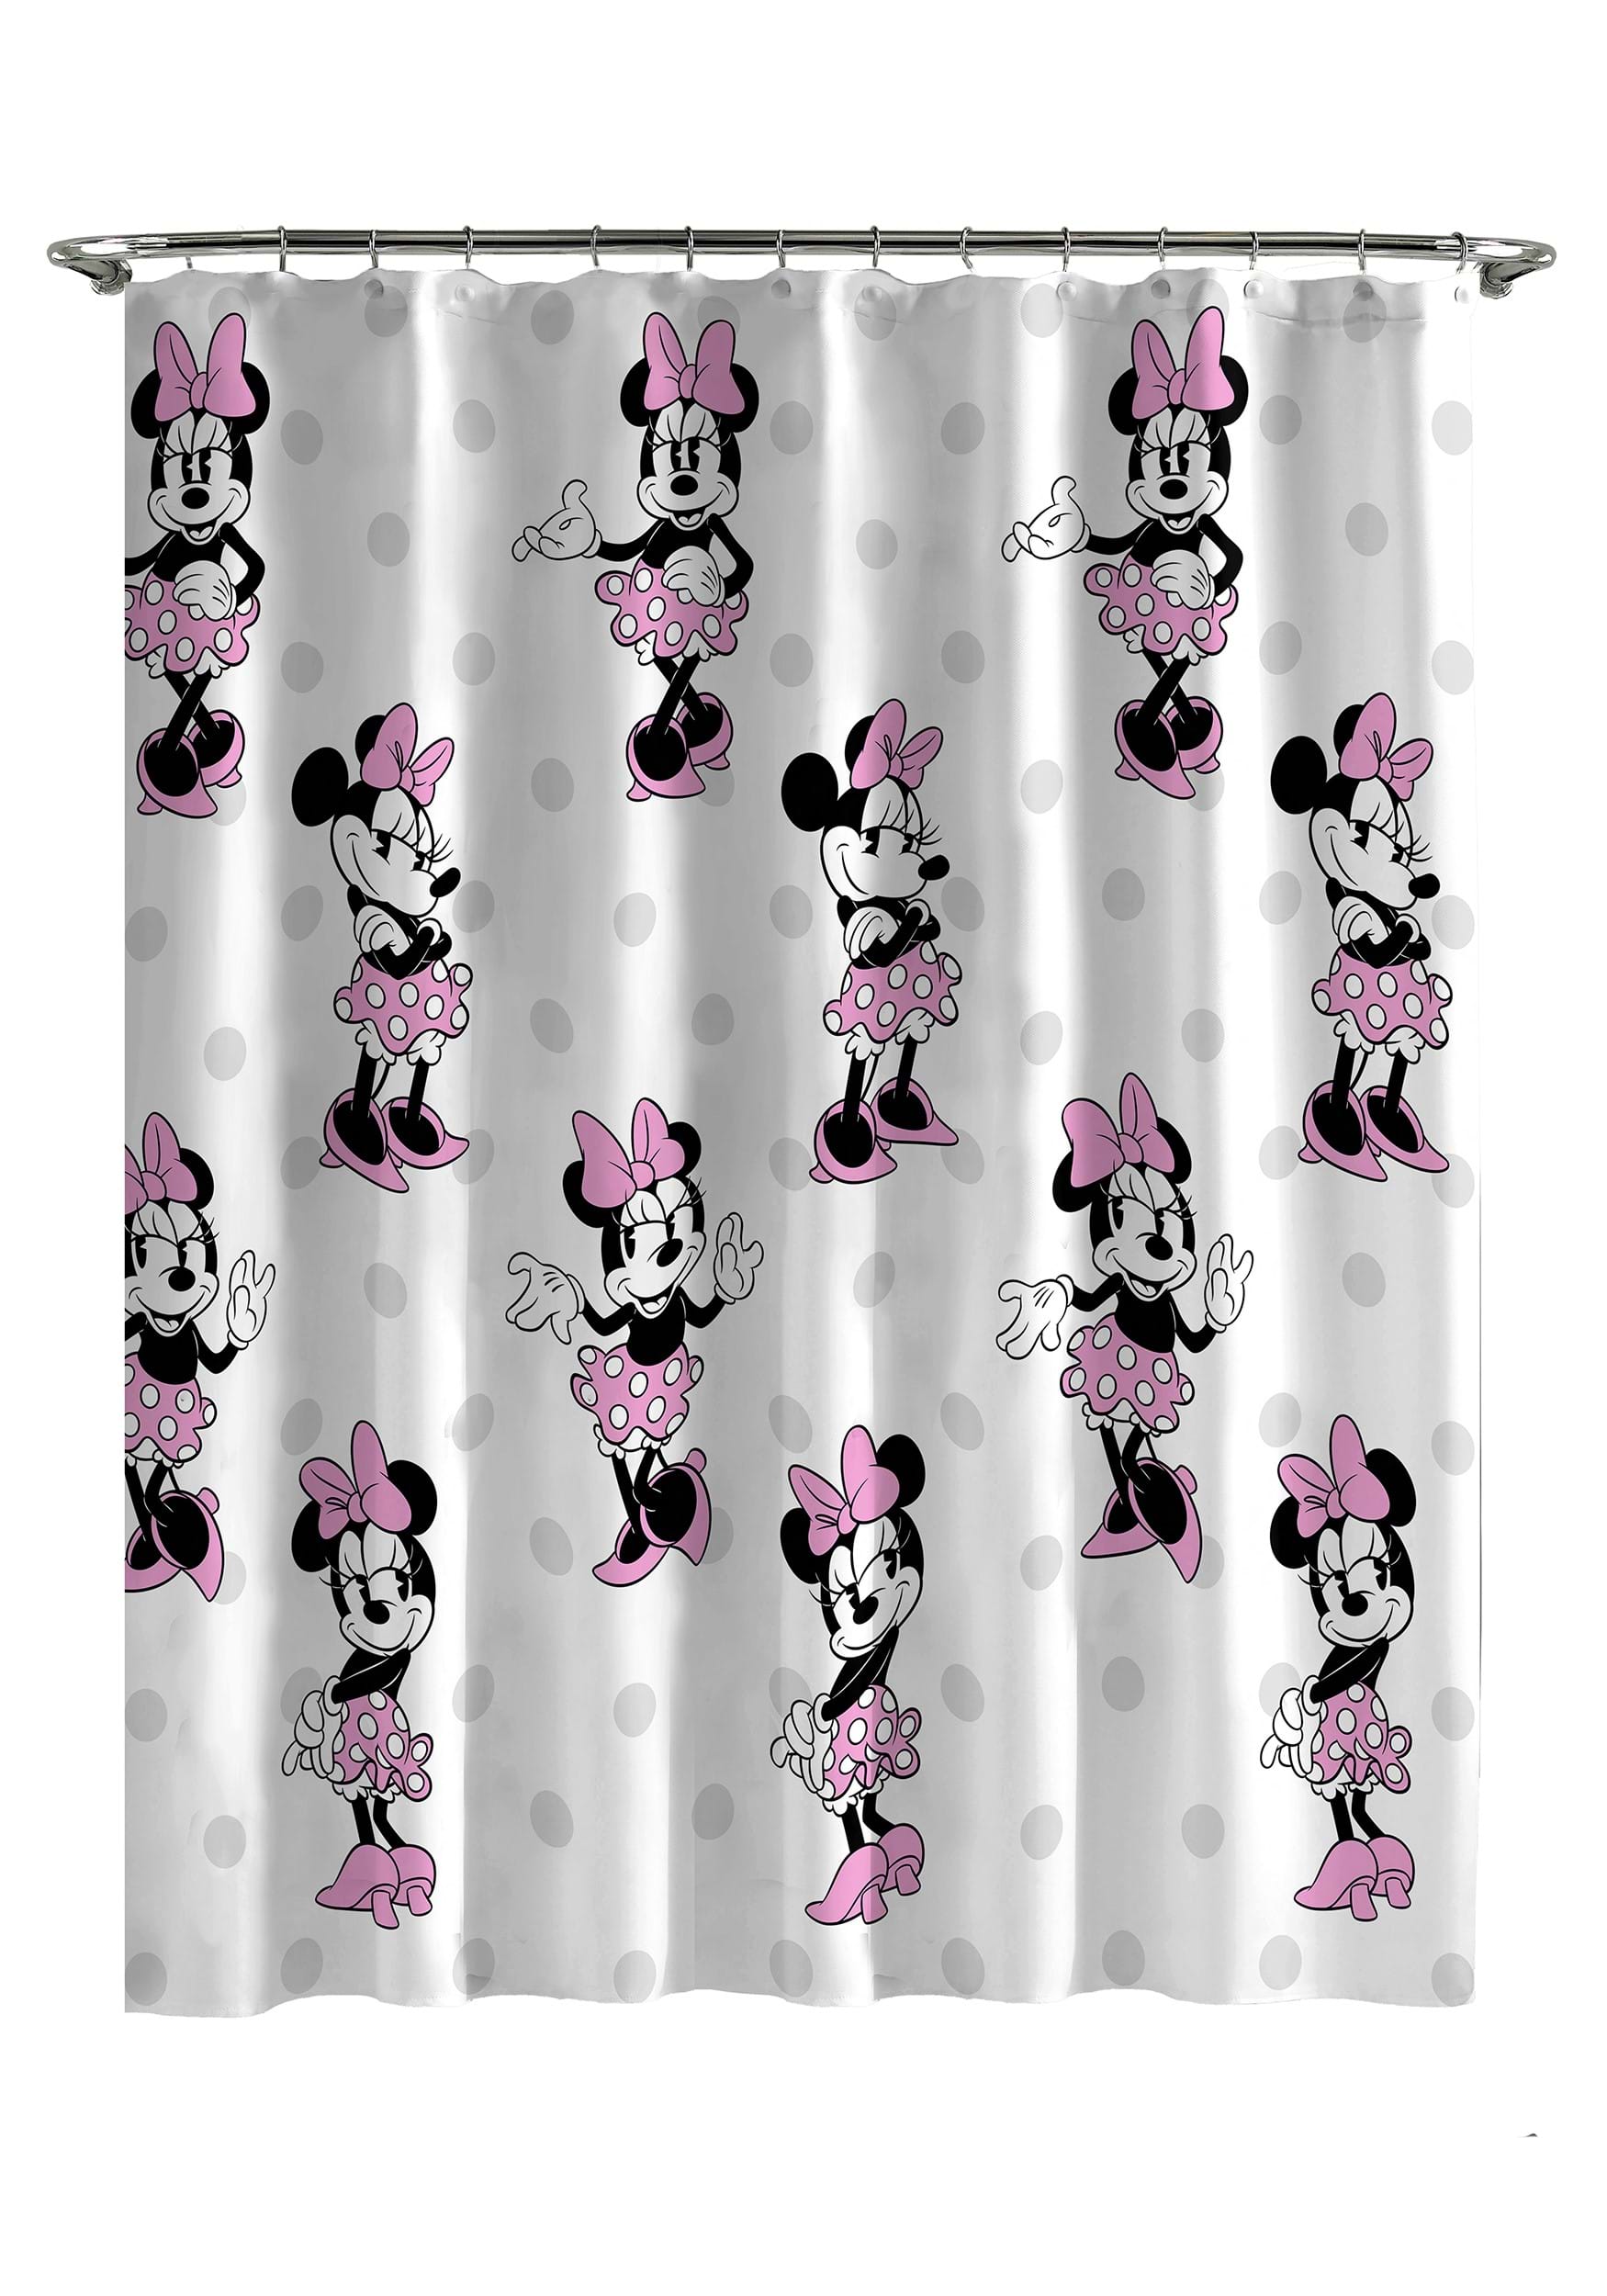 Disney Cheery Minnie Mouse Shower Curtains